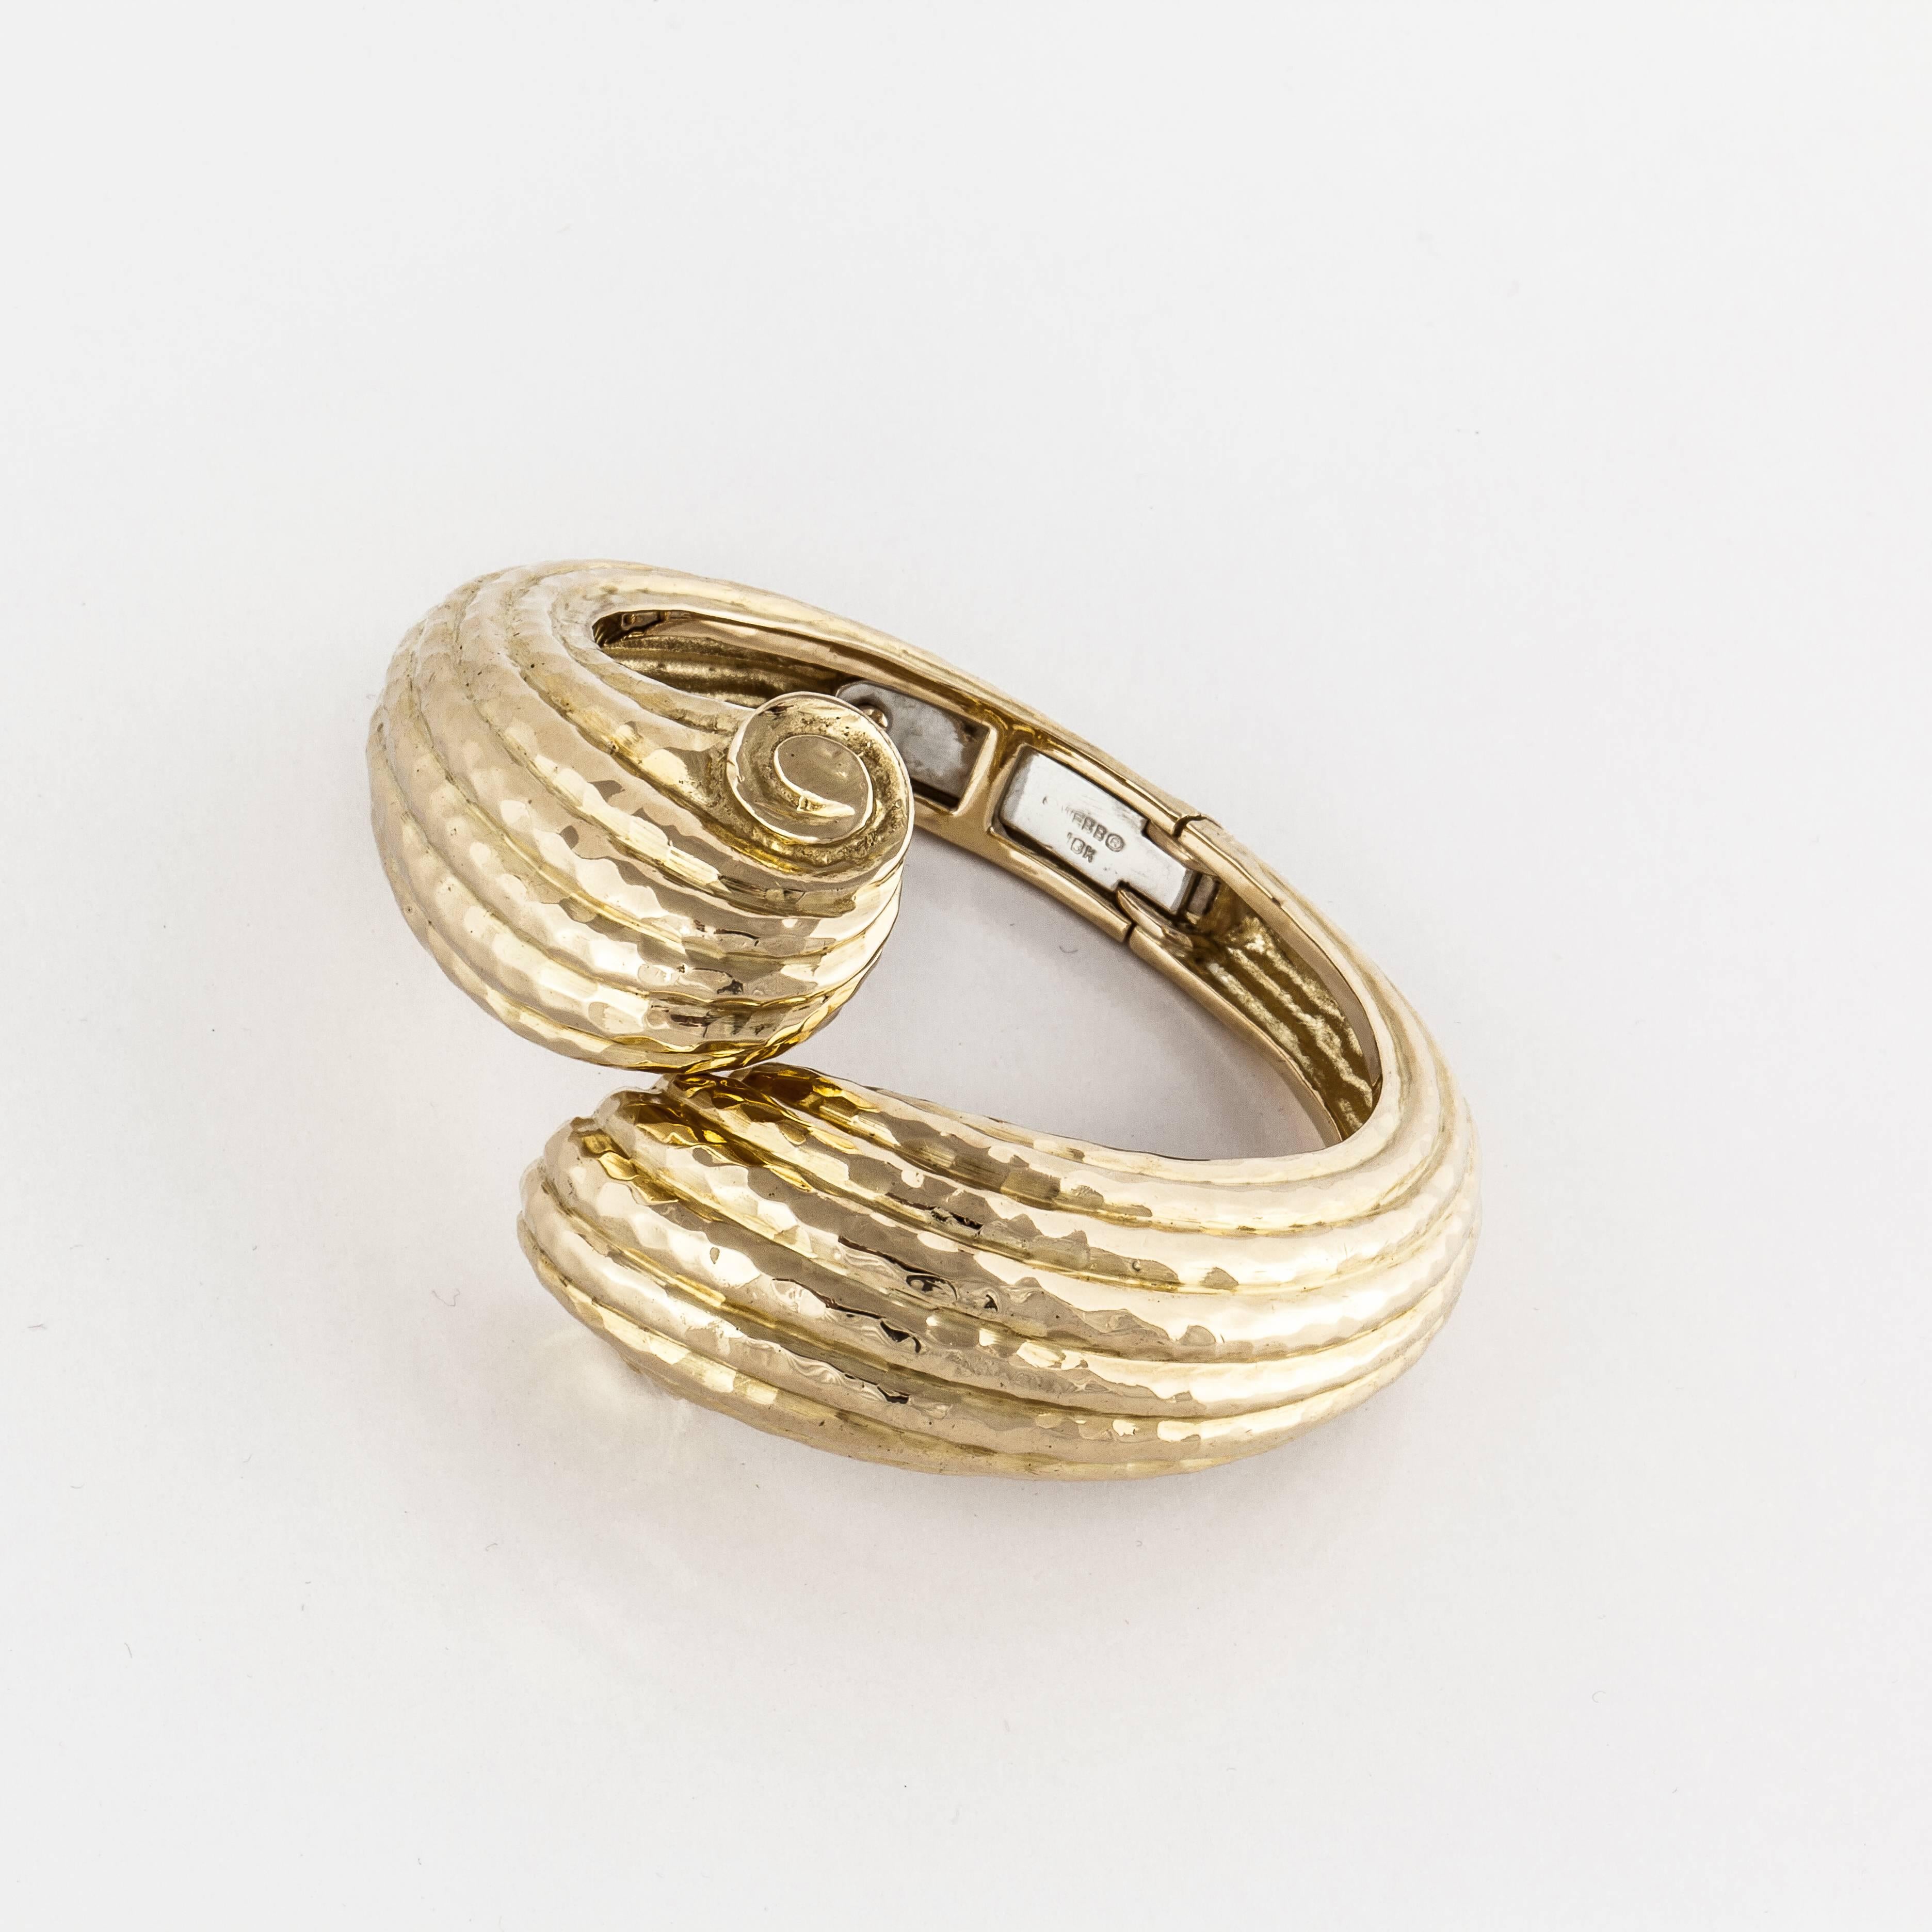 David Webb crossover styled bangle bracelet in 18K hammered yellow gold, hinged at the bottom.  Marked on the inside 